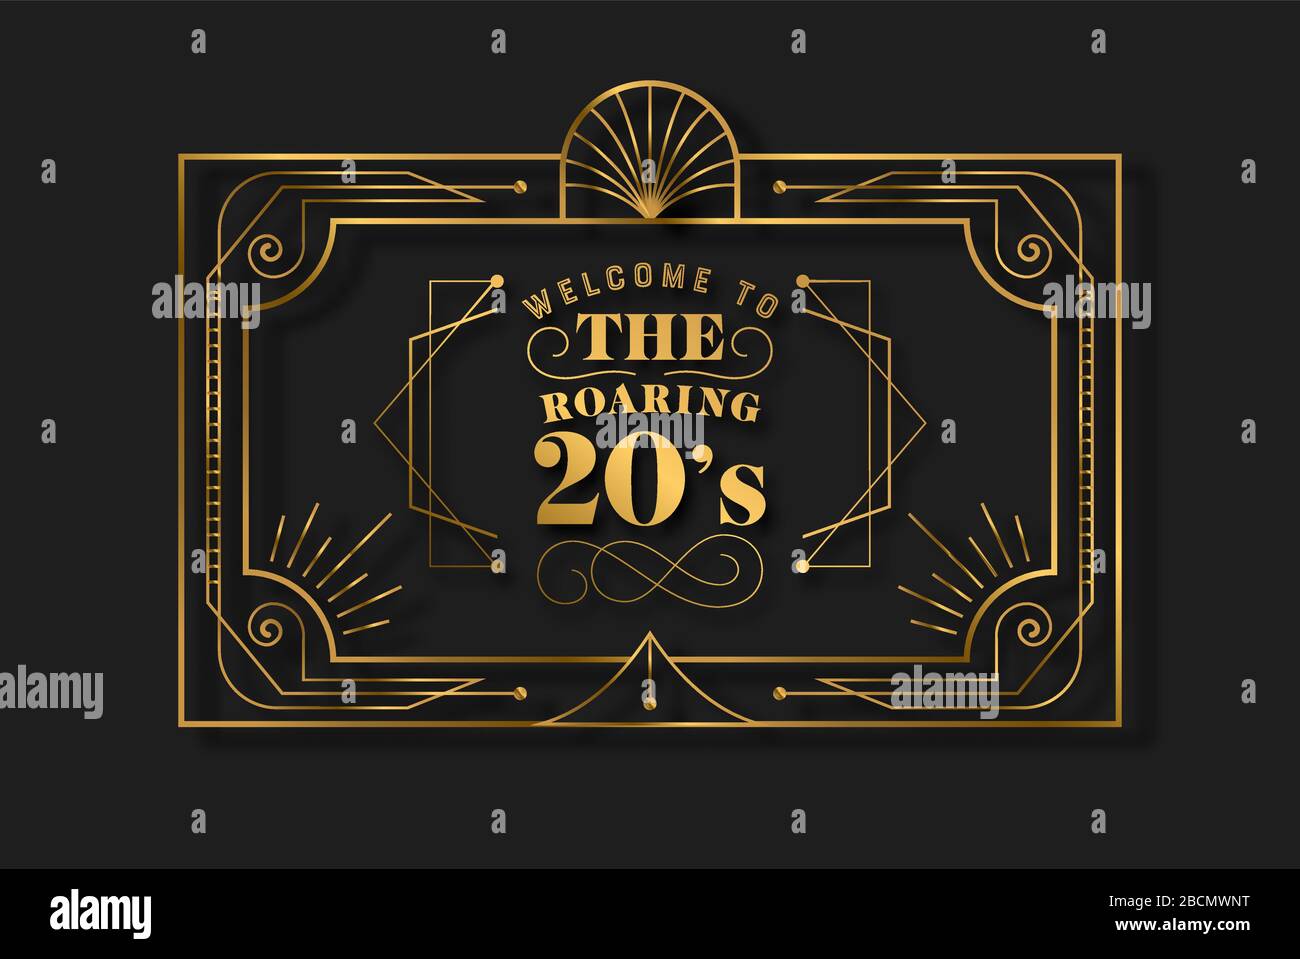 The roaring 20s abstract background frame in vintage art deco style. Gold and black retro design with traditional geometric line decoration, text quot Stock Vector